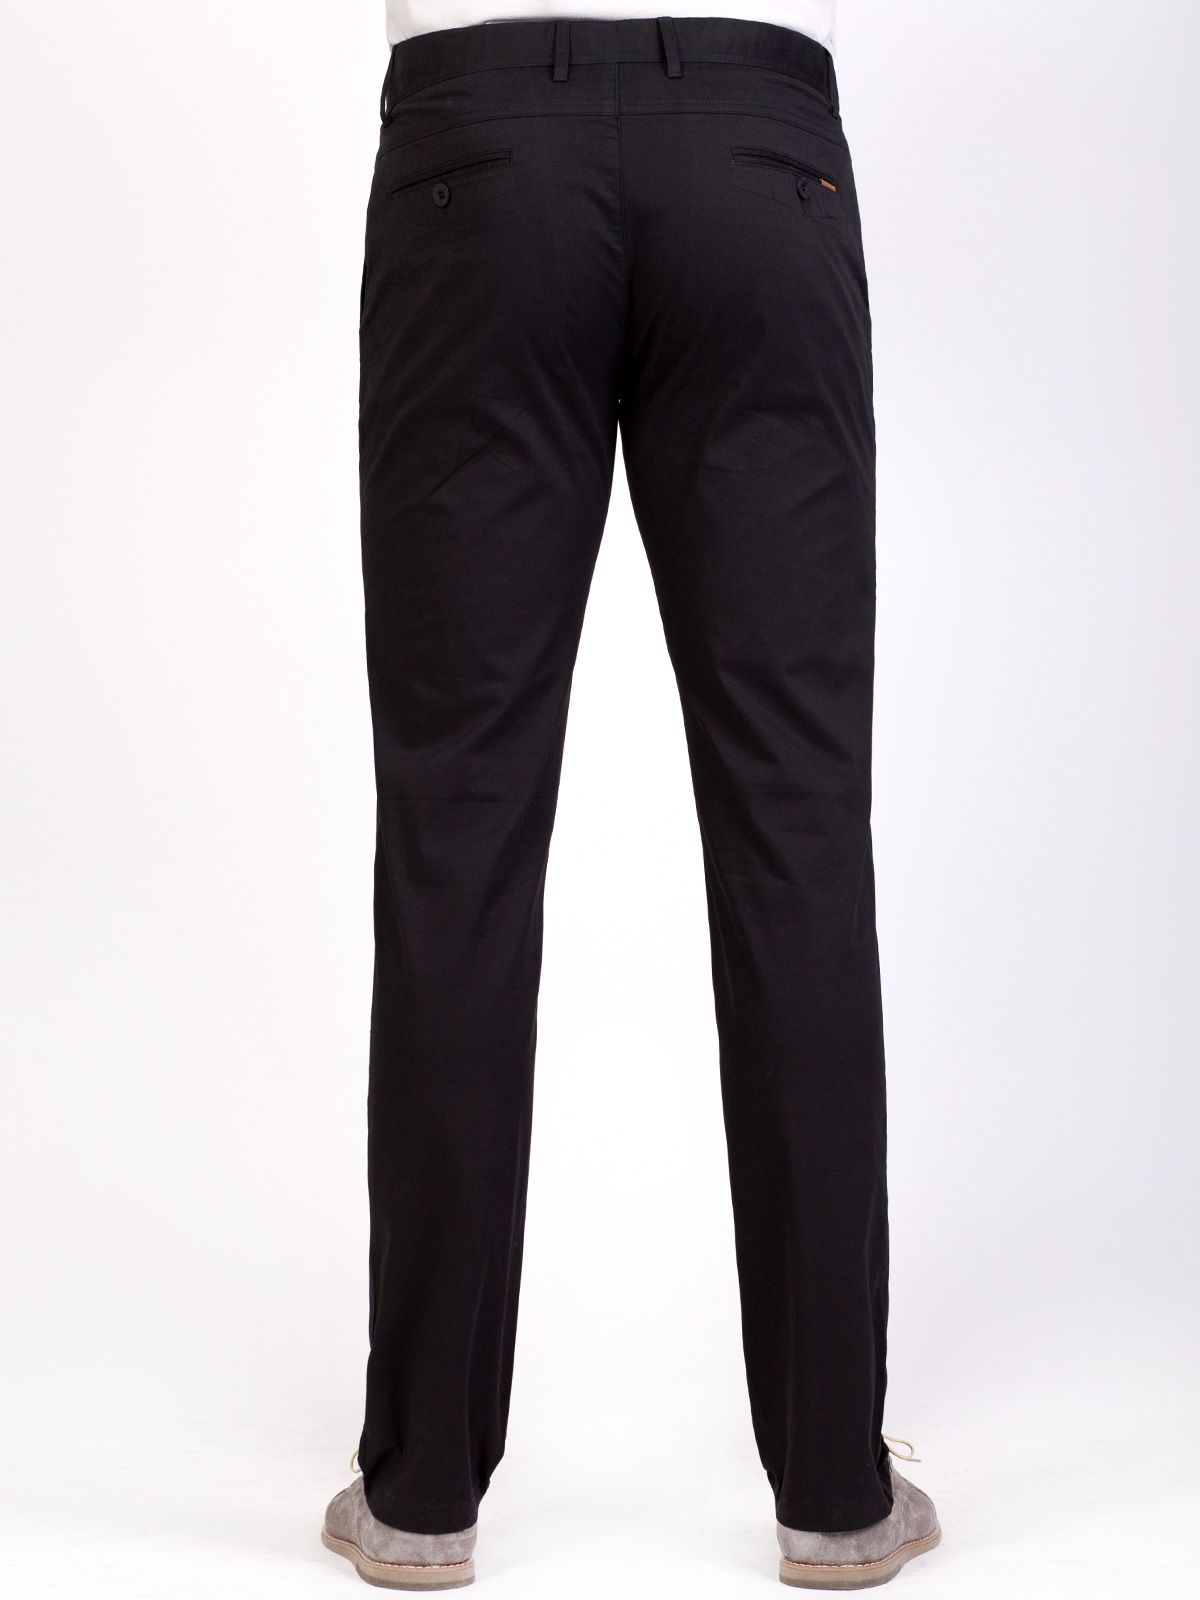  pants in black cotton with elastane  - 63229 € 11.25 img3